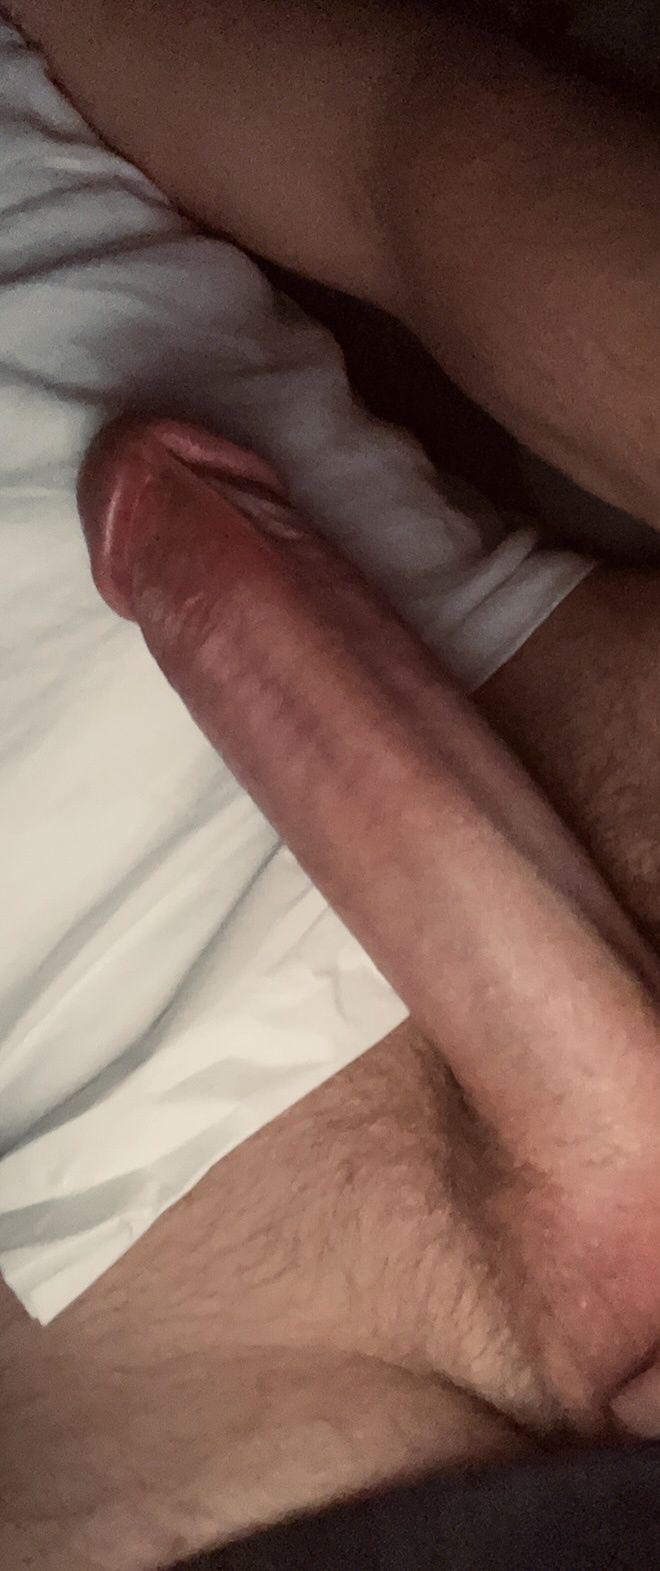 Me and my dick  #2